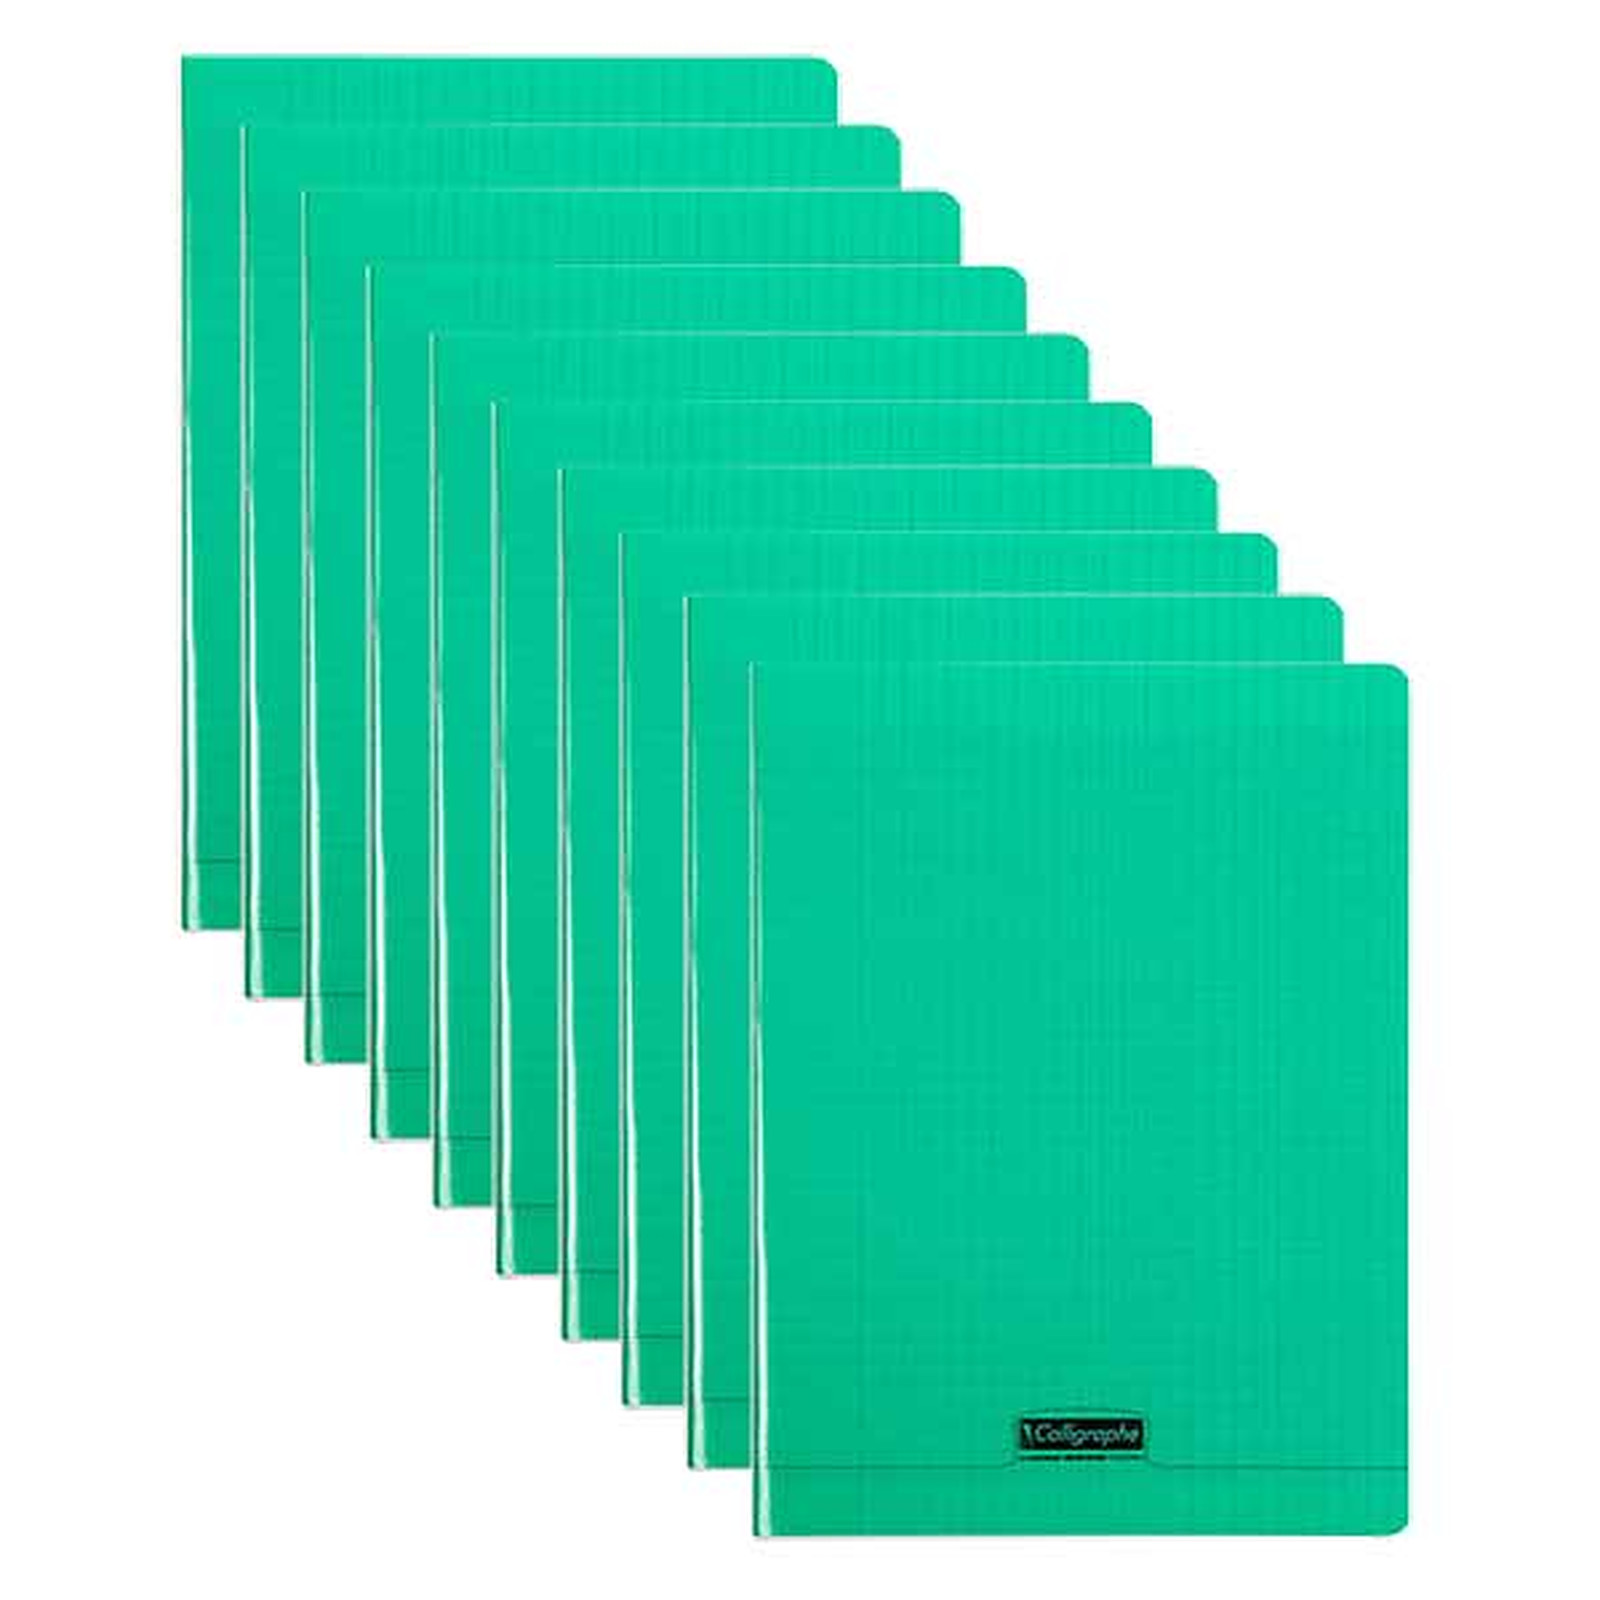 Calligraphe 8000 Polypro Cahier 96 pages 24 x 32 cm seyes grands carreaux Vert x 10 - Cahier Calligraphe